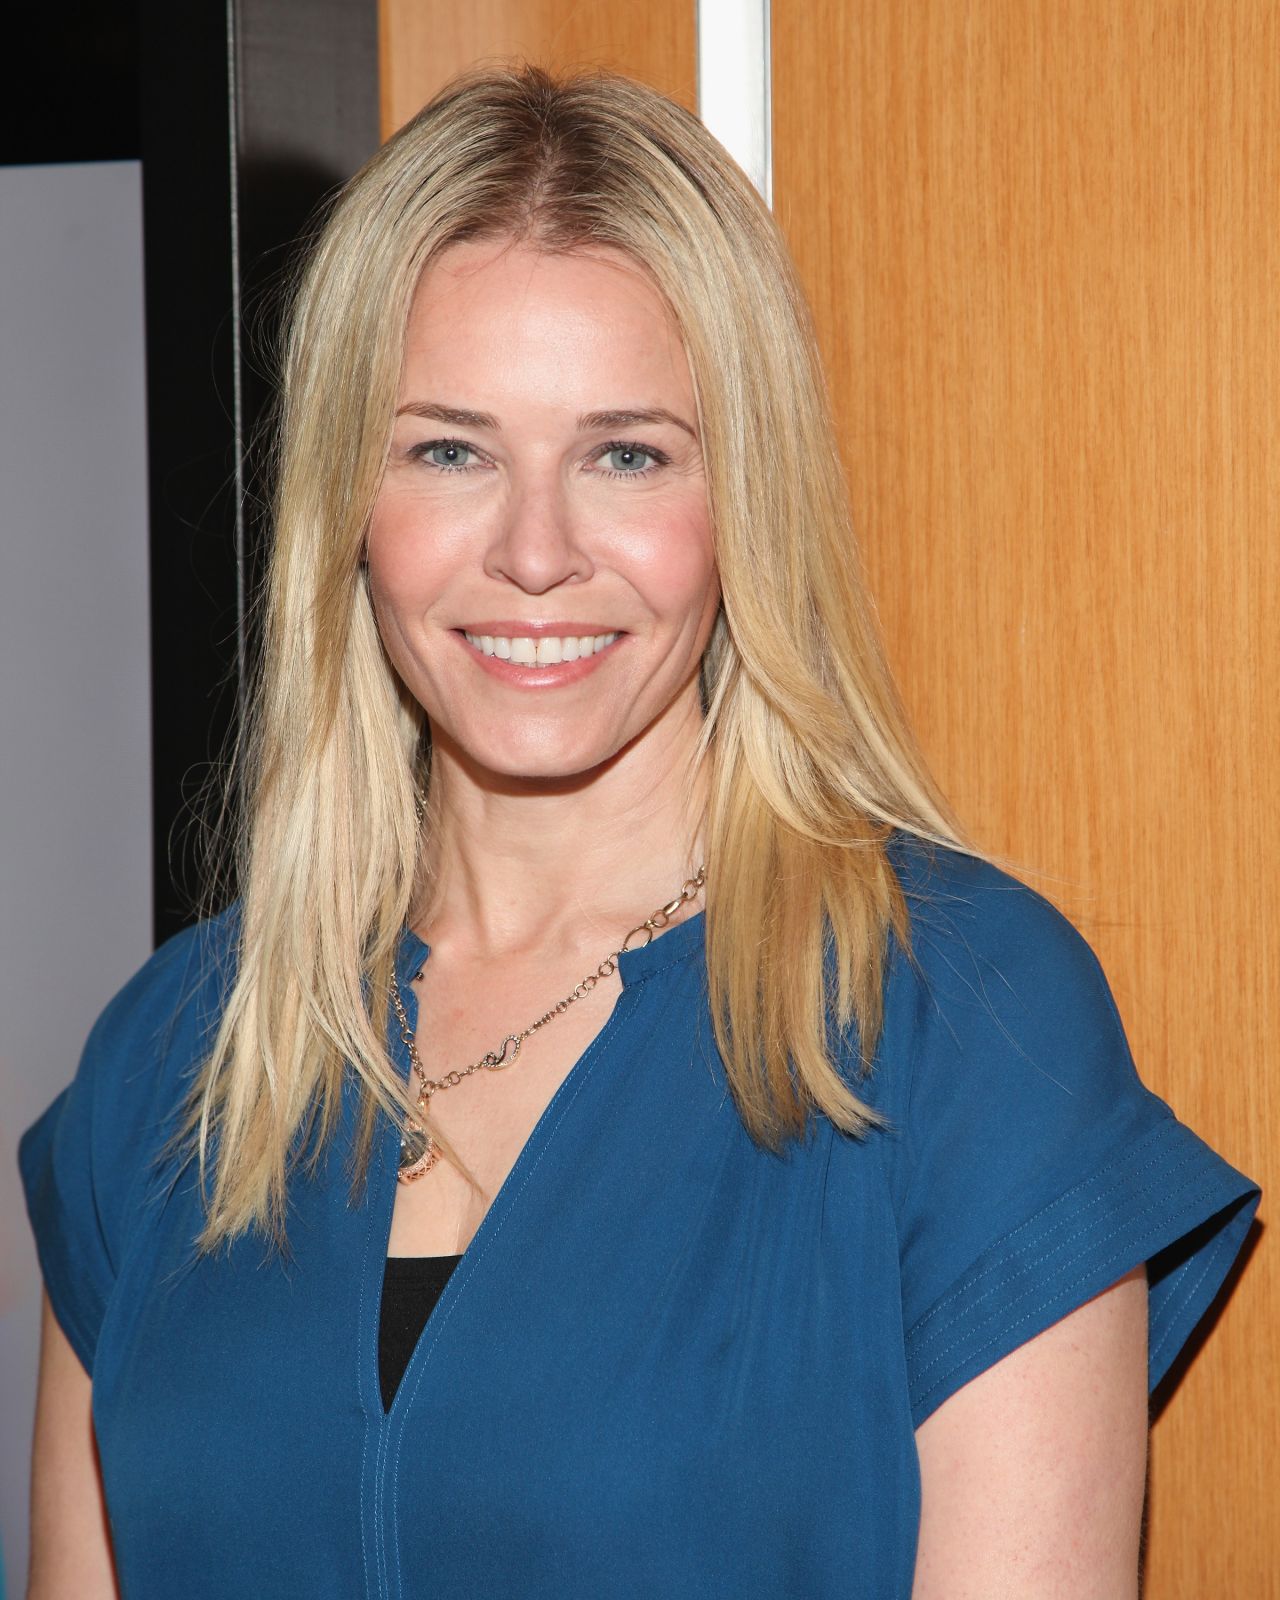 E! host Chelsea Handler <a href="http://www.usmagazine.com/celebrity-news/news/chelsea-handler-i-dont-have-the-time-to-raise-a-child-2013294" target="_blank" target="_blank">said in early 2013</a> that she wouldn't want children because "I don't think I'd be a great mother." 